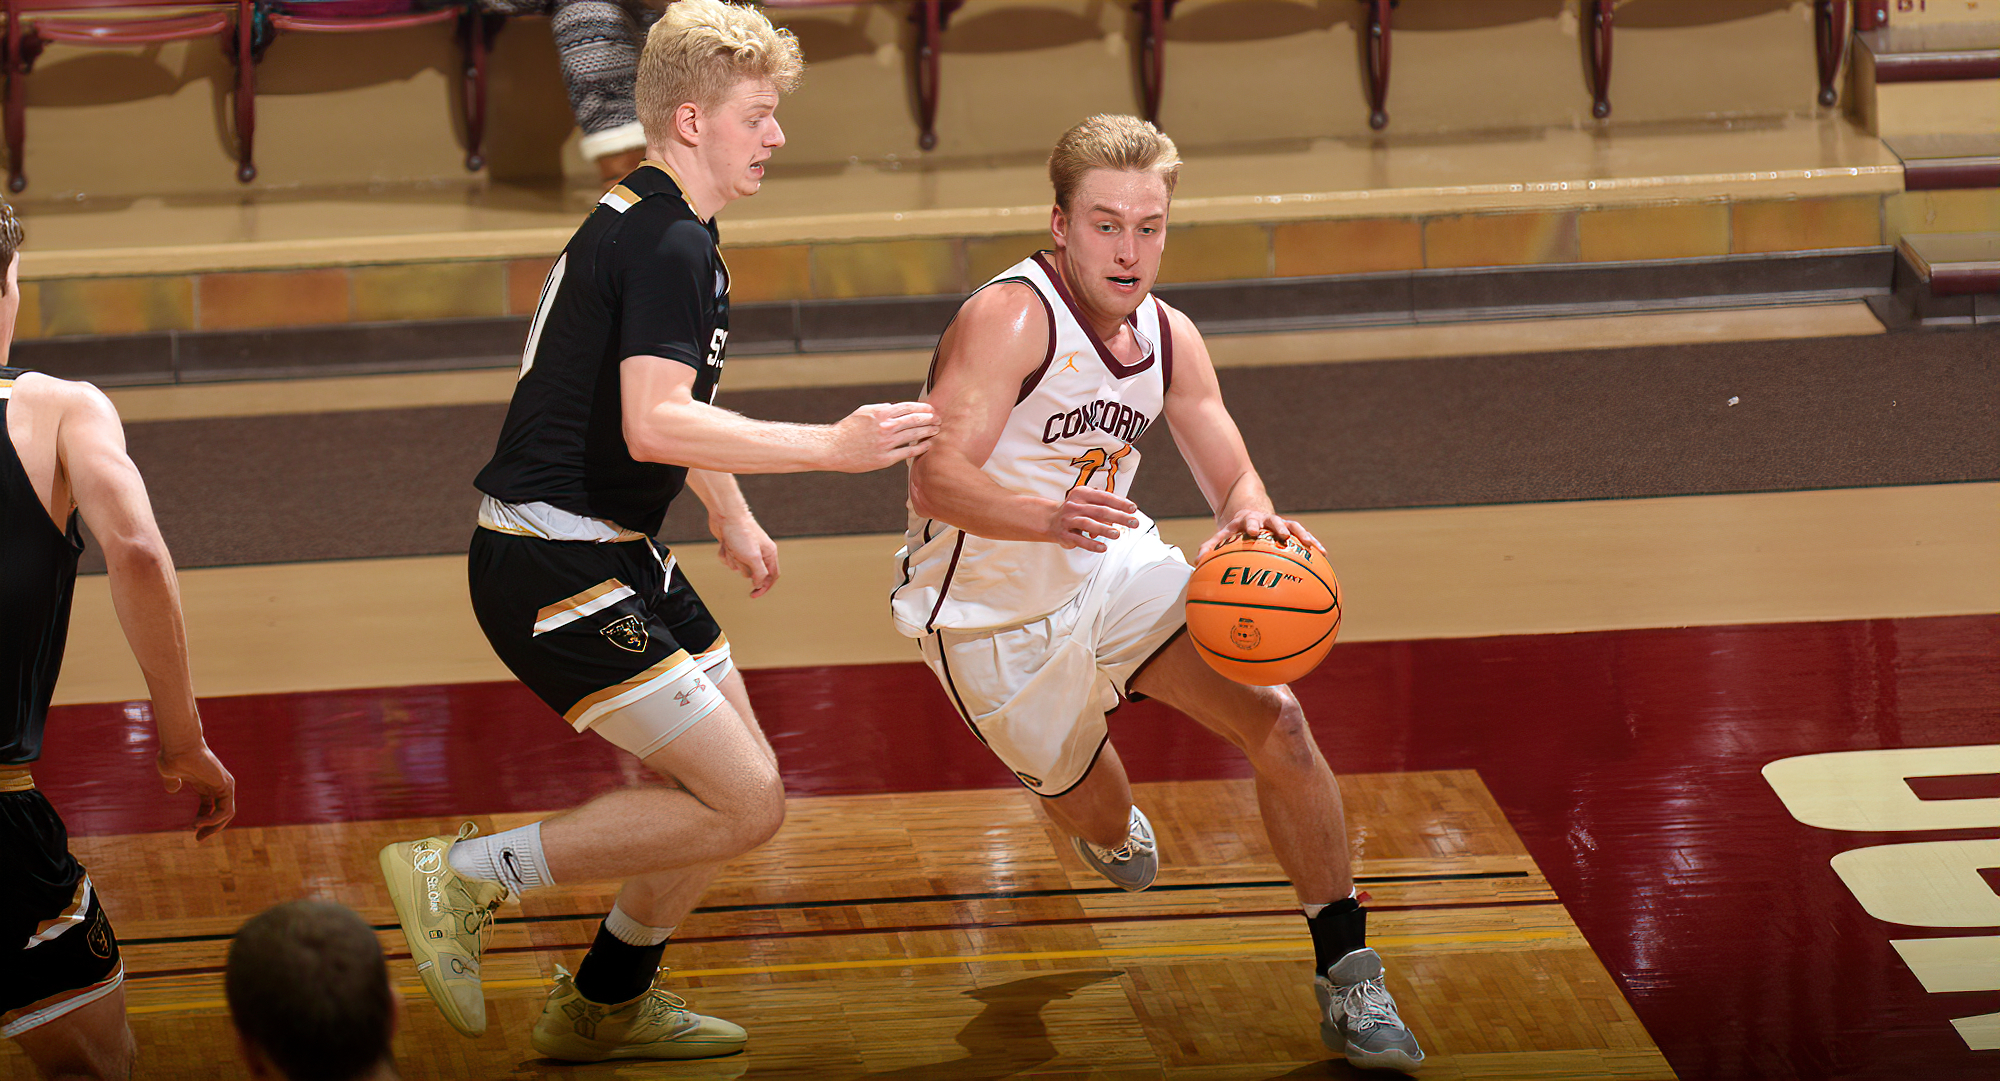 Senior David Birkeland drives to the basket for two of his season-high 14 points in the Cobbers' wire-to-wire win over previously unbeaten St. Olaf.